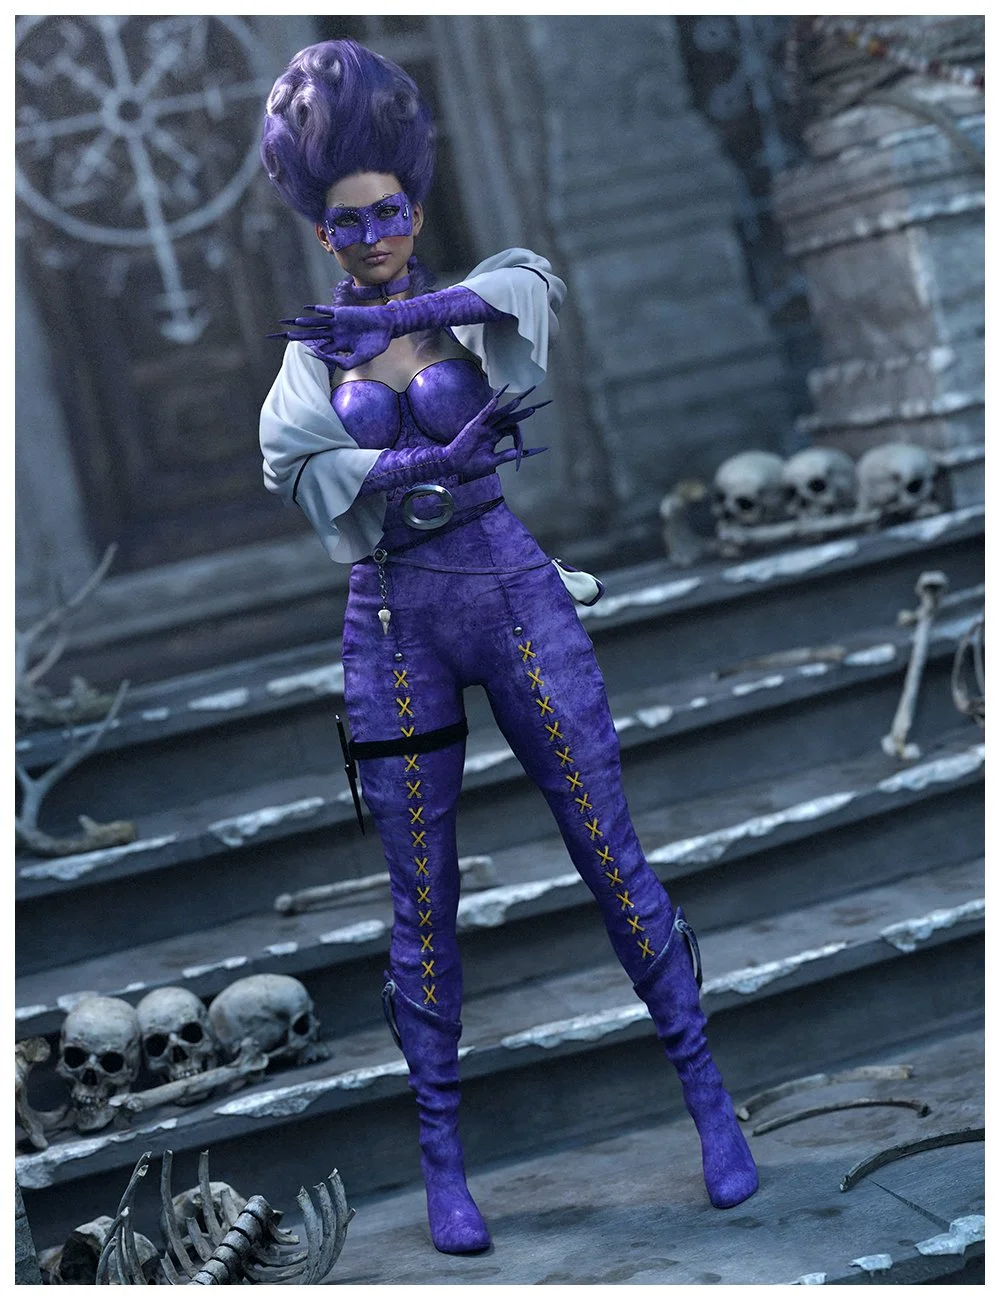 ND Crowbeauty Outfit for Genesis 8.1 Female